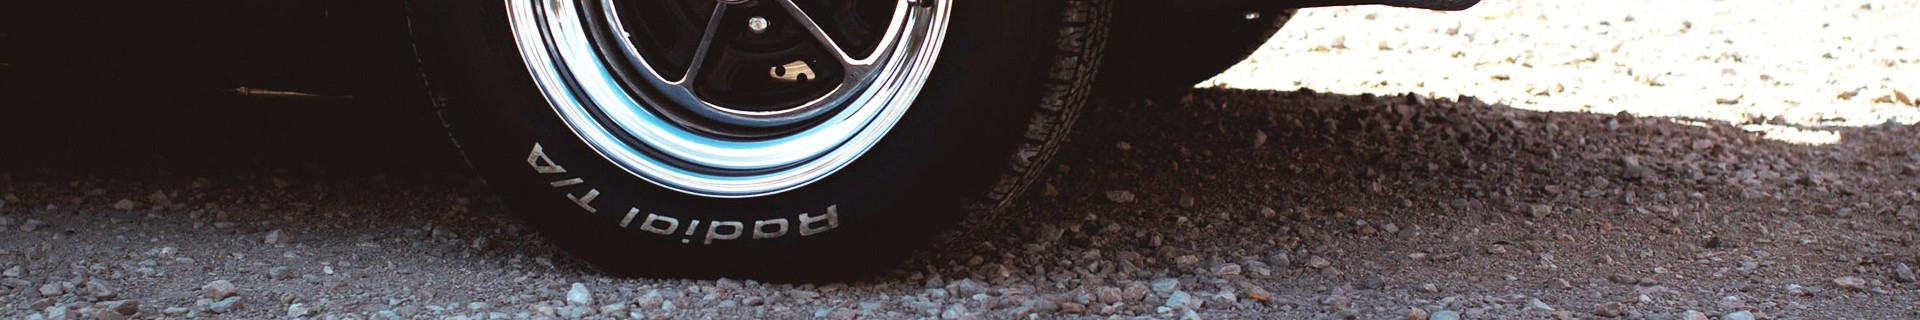 7 Reasons Why It’s Bad to Drive on Underinflated Tyres